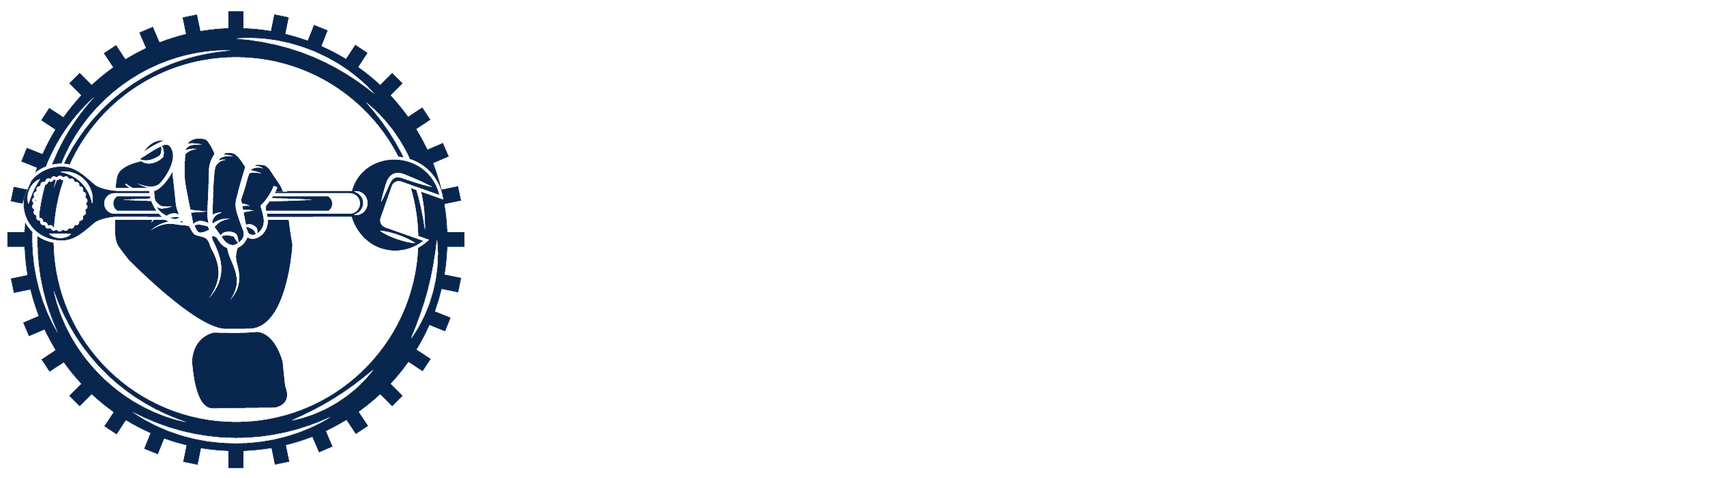 Glenn Rowe Auto Electrics—Servicing Tweed Heads and the Northern Rivers